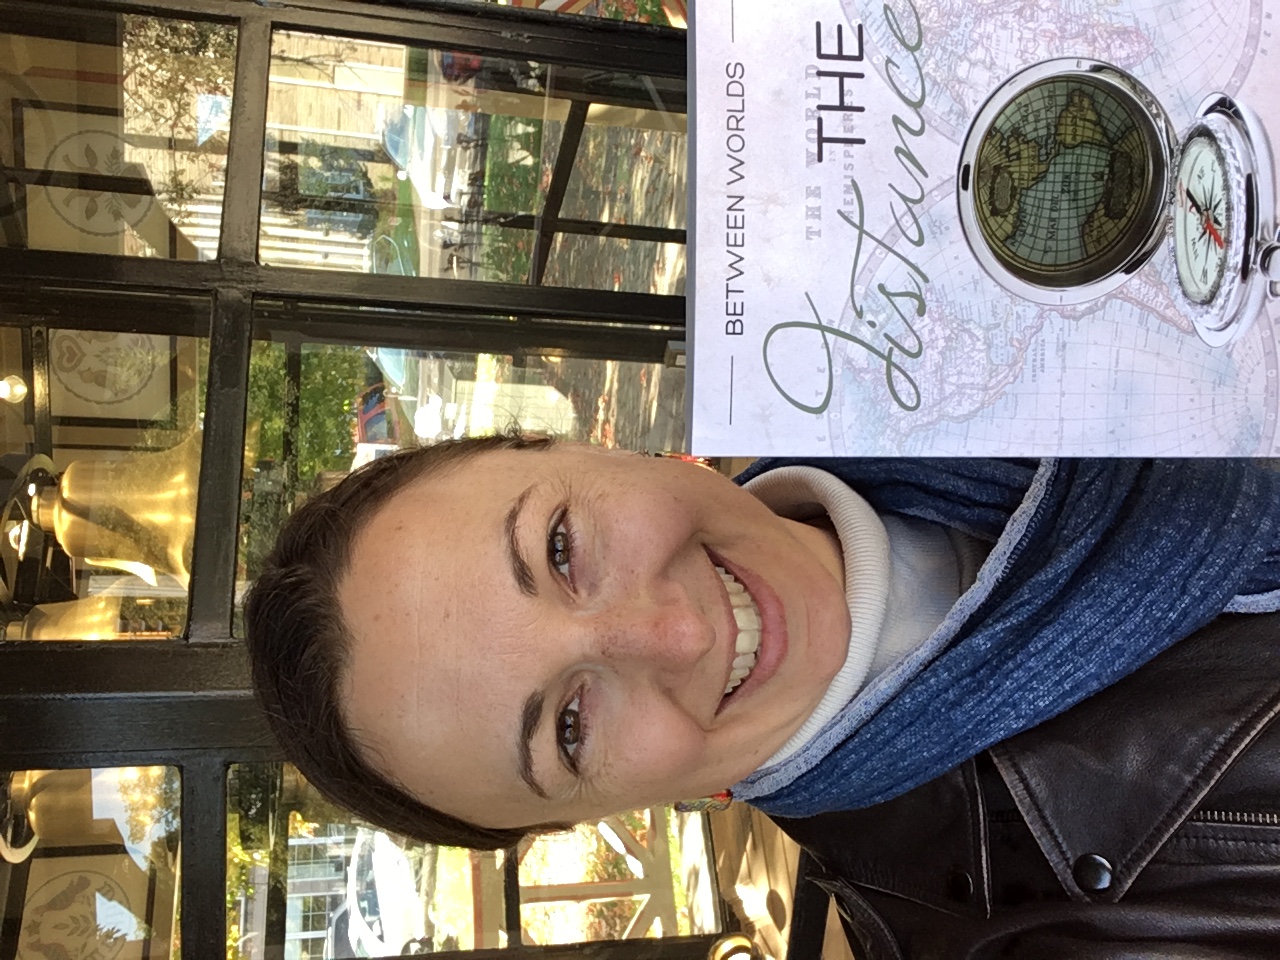 Lori Wolf-Heffner holding a copy of Tea Shop for Two in front of the rusty bell sculpture mentioned in the book